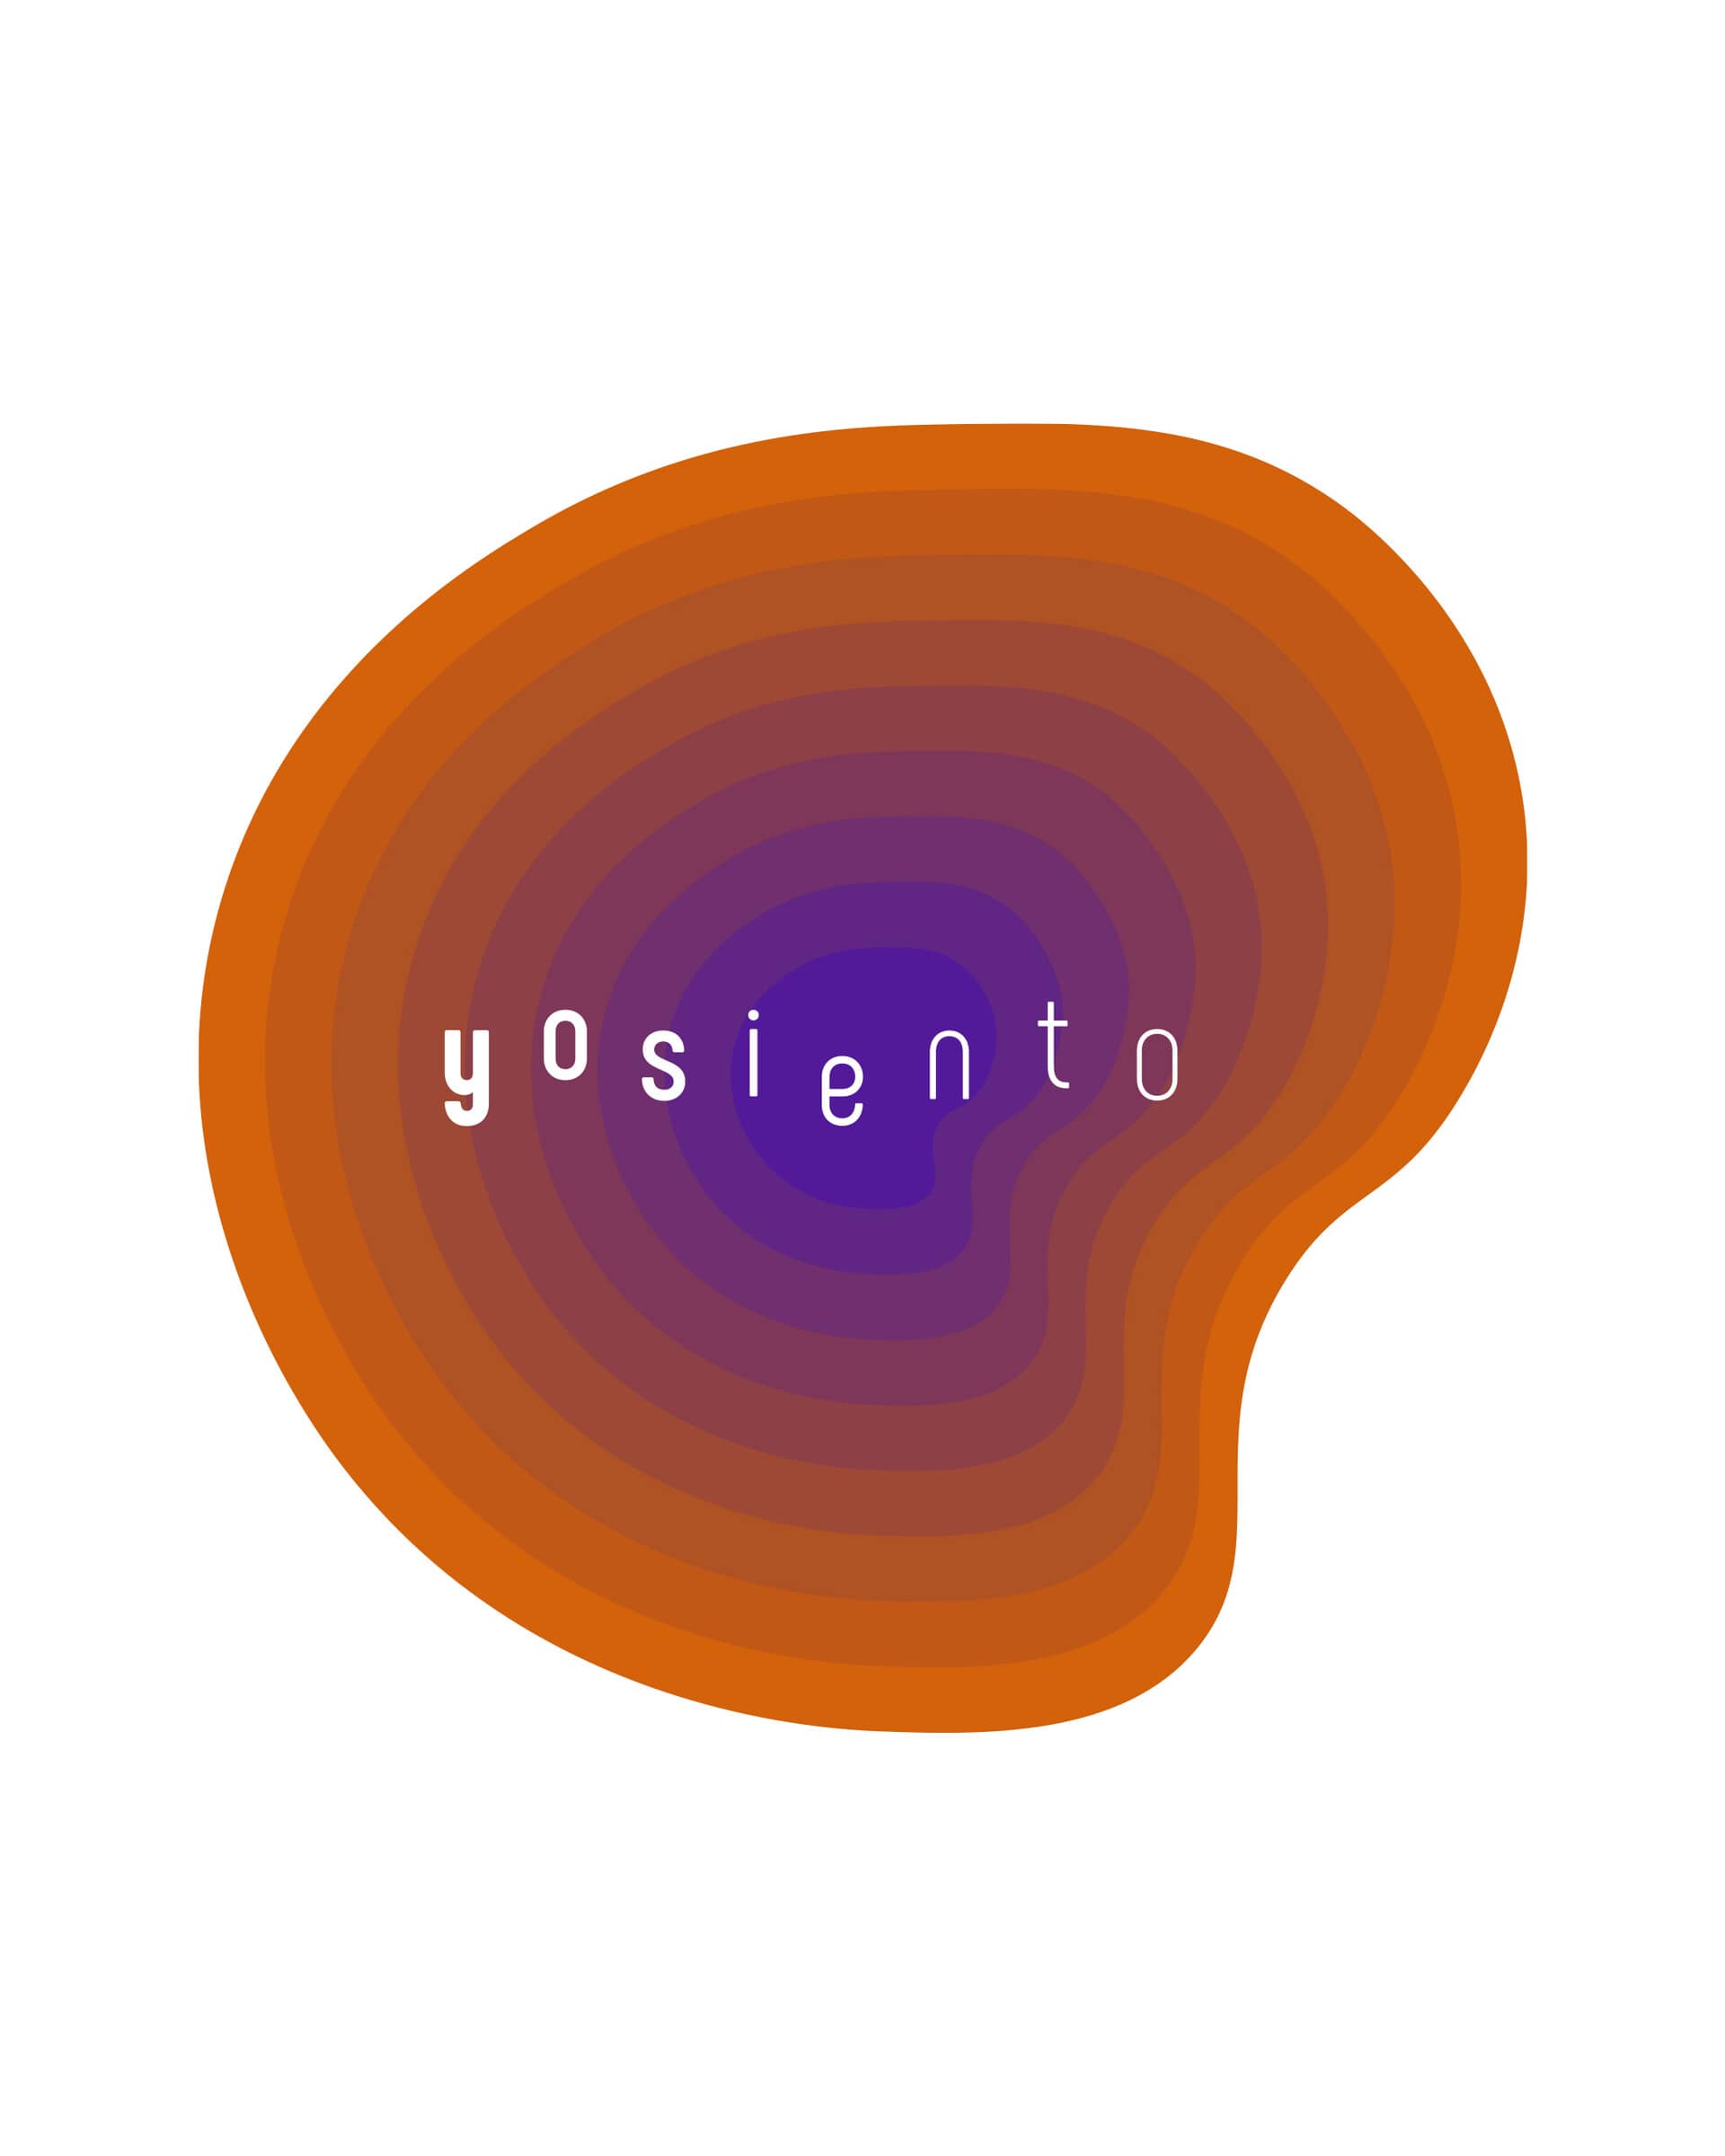 Yosiento logo in a pruple-to-orange organic shape container